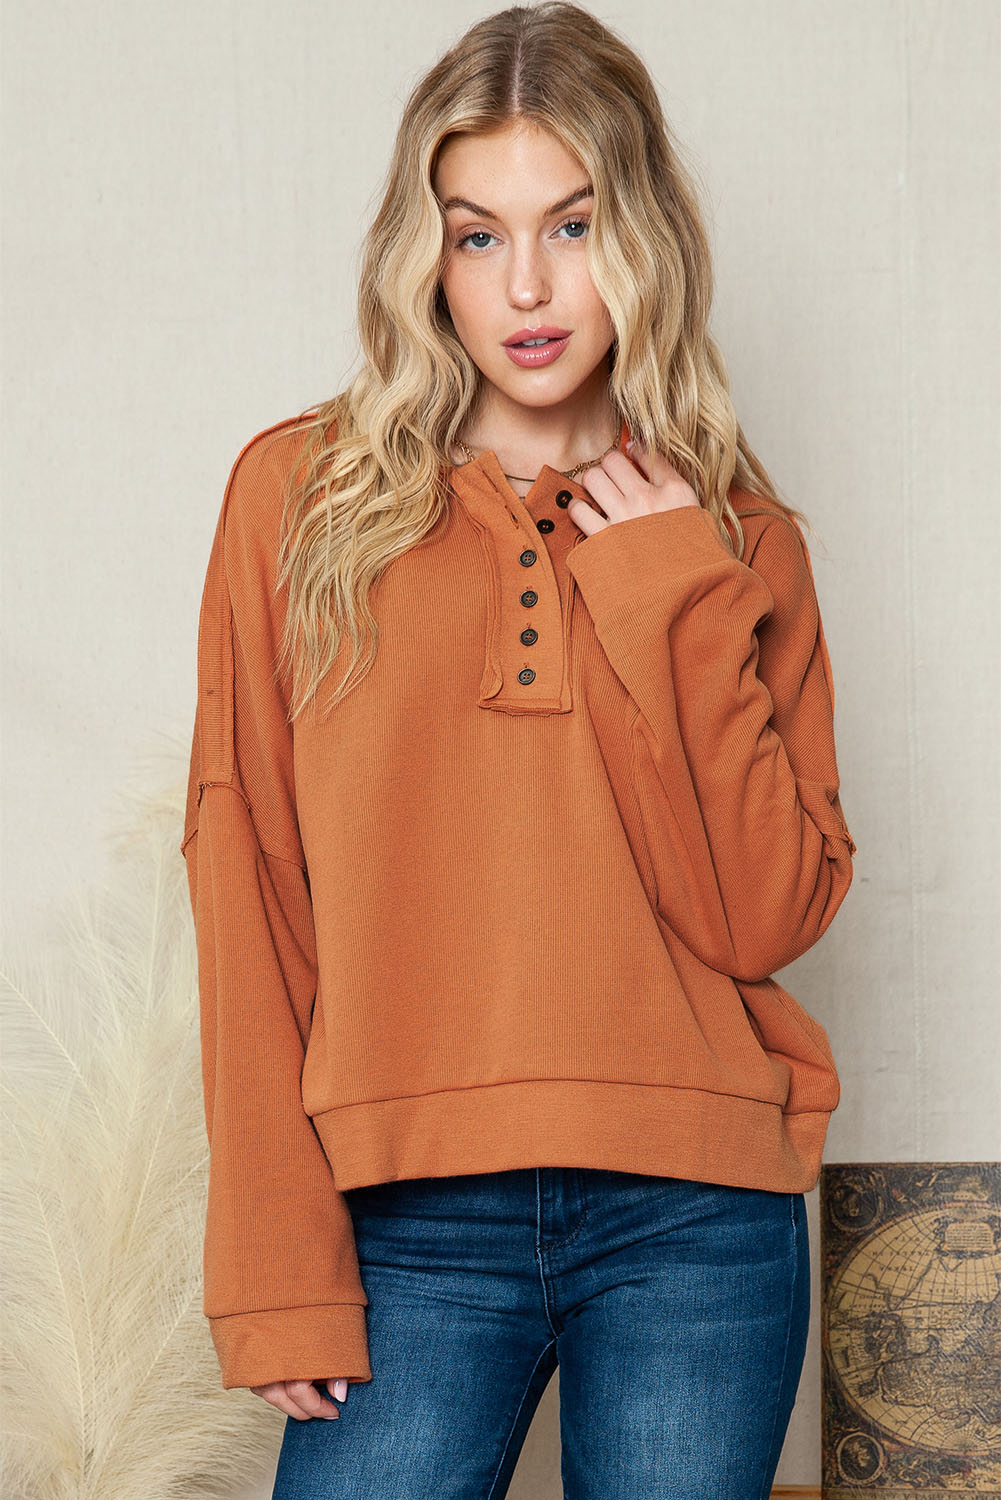 Quarter-Button Exposed Seam Dropped Shoulder Hoodie - Orange / S - Women’s Clothing & Accessories - Shirts & Tops - 7